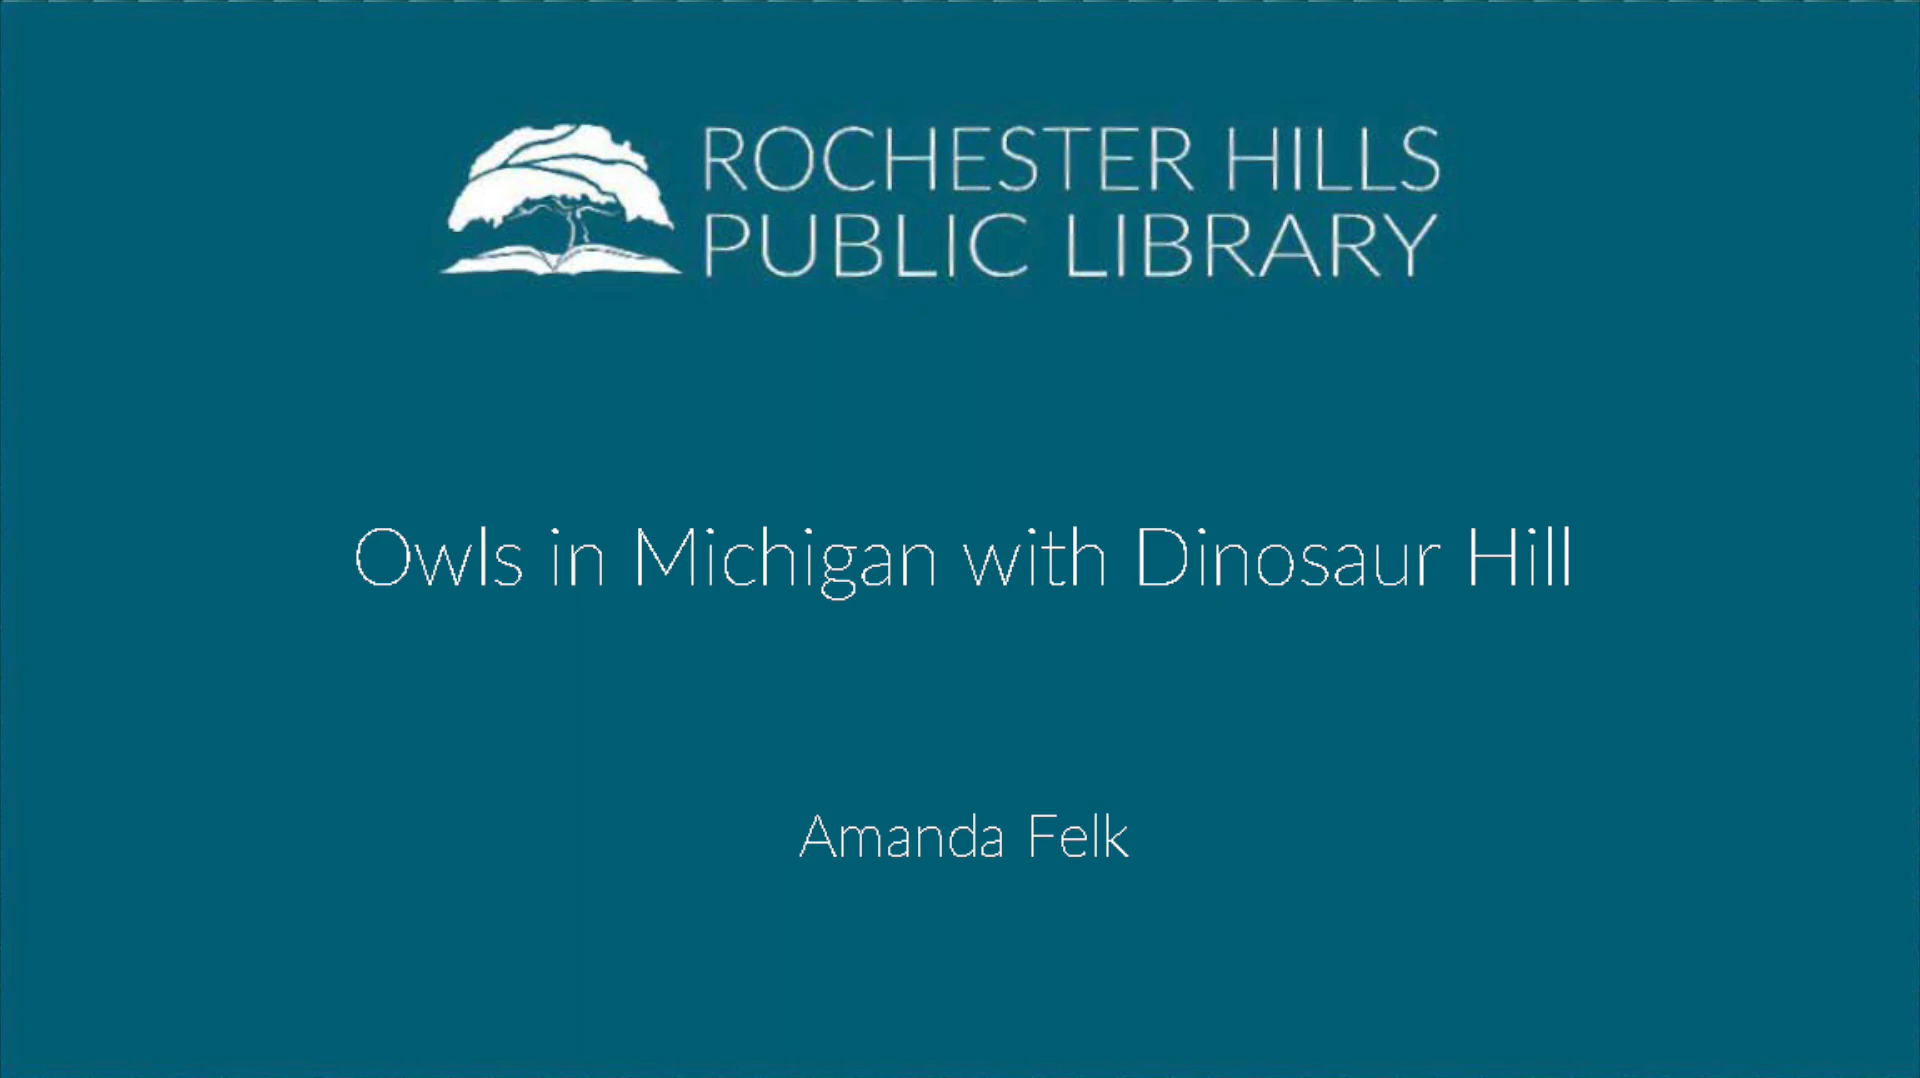 Owls in Michigan with Dinosaur Hill